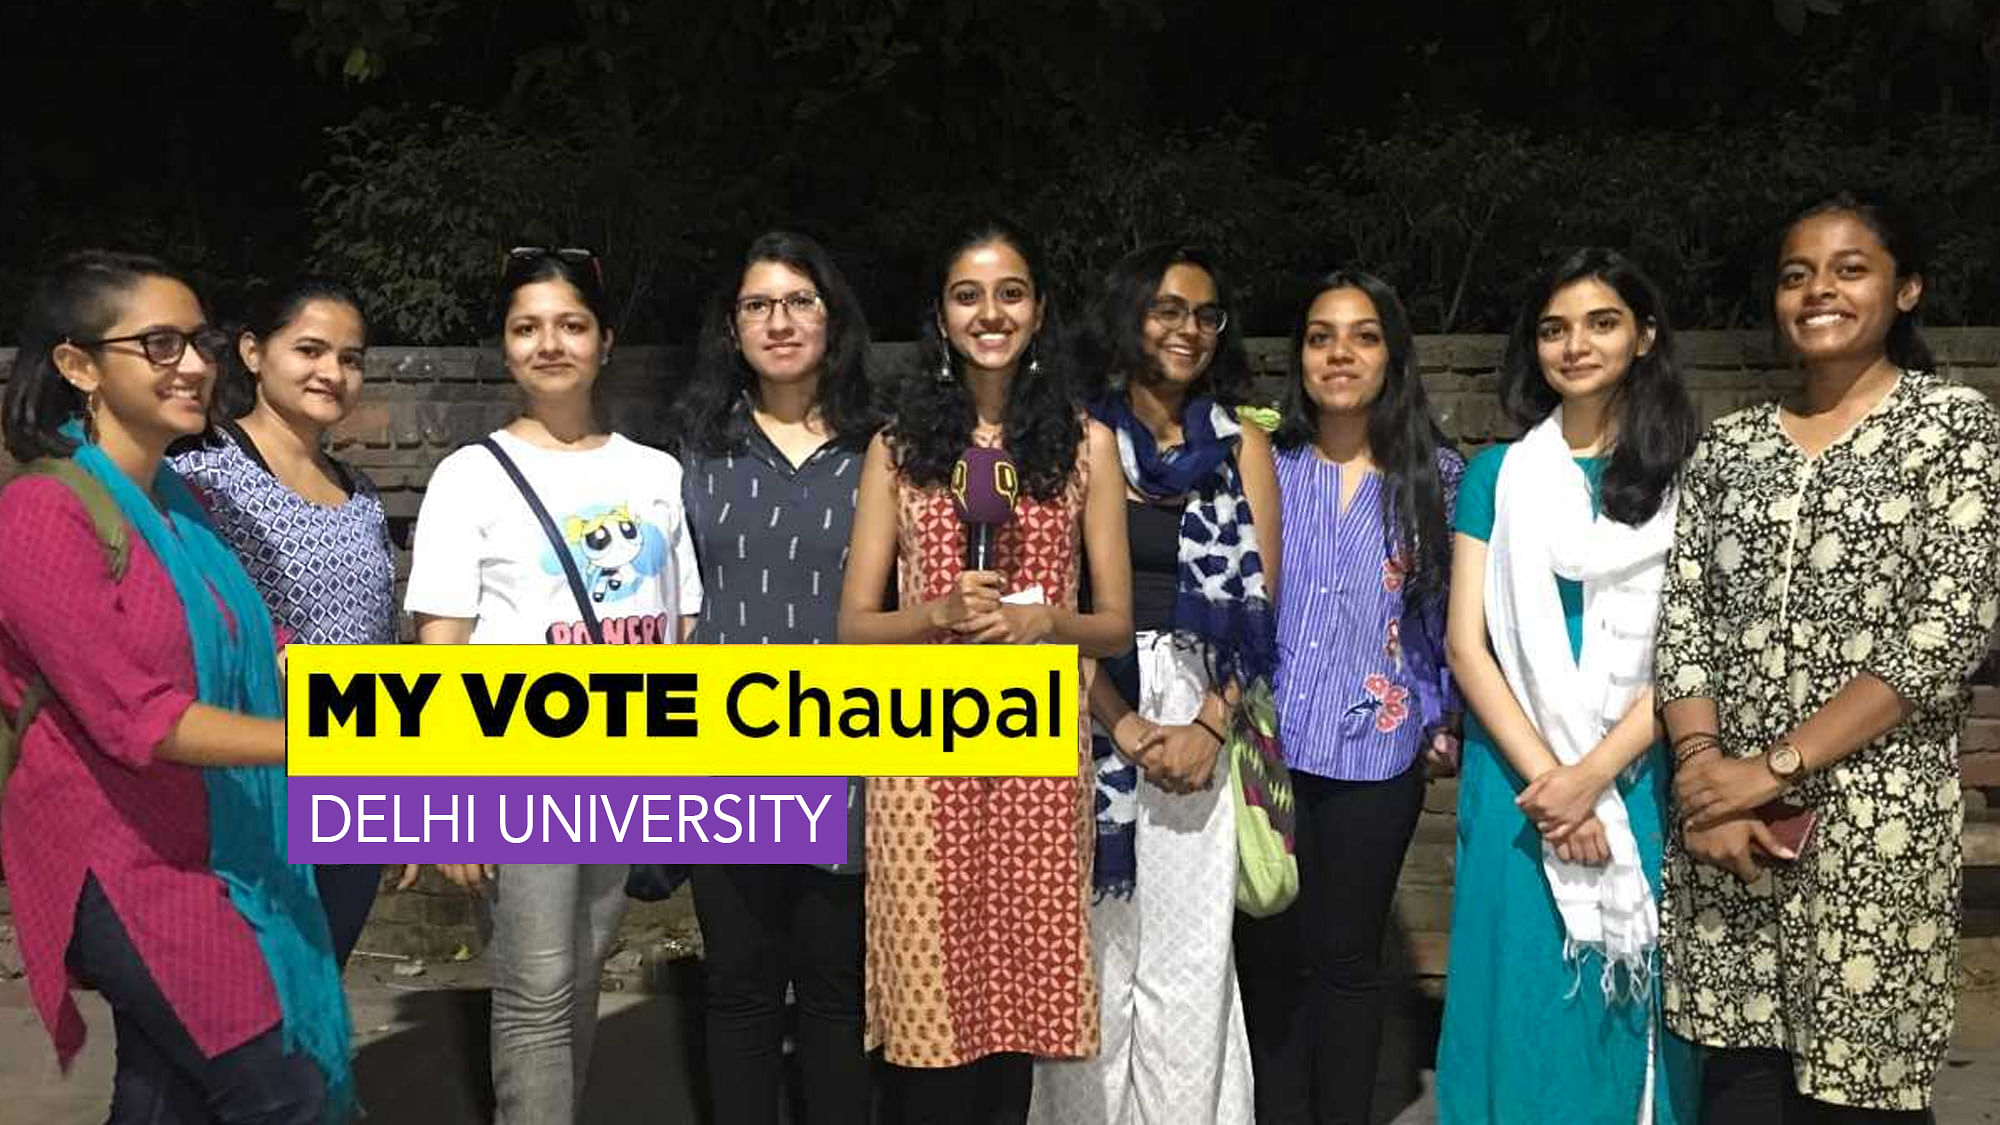 The Quint’s chaupal reaches Delhi University to find out if women’s safety is an election issue.